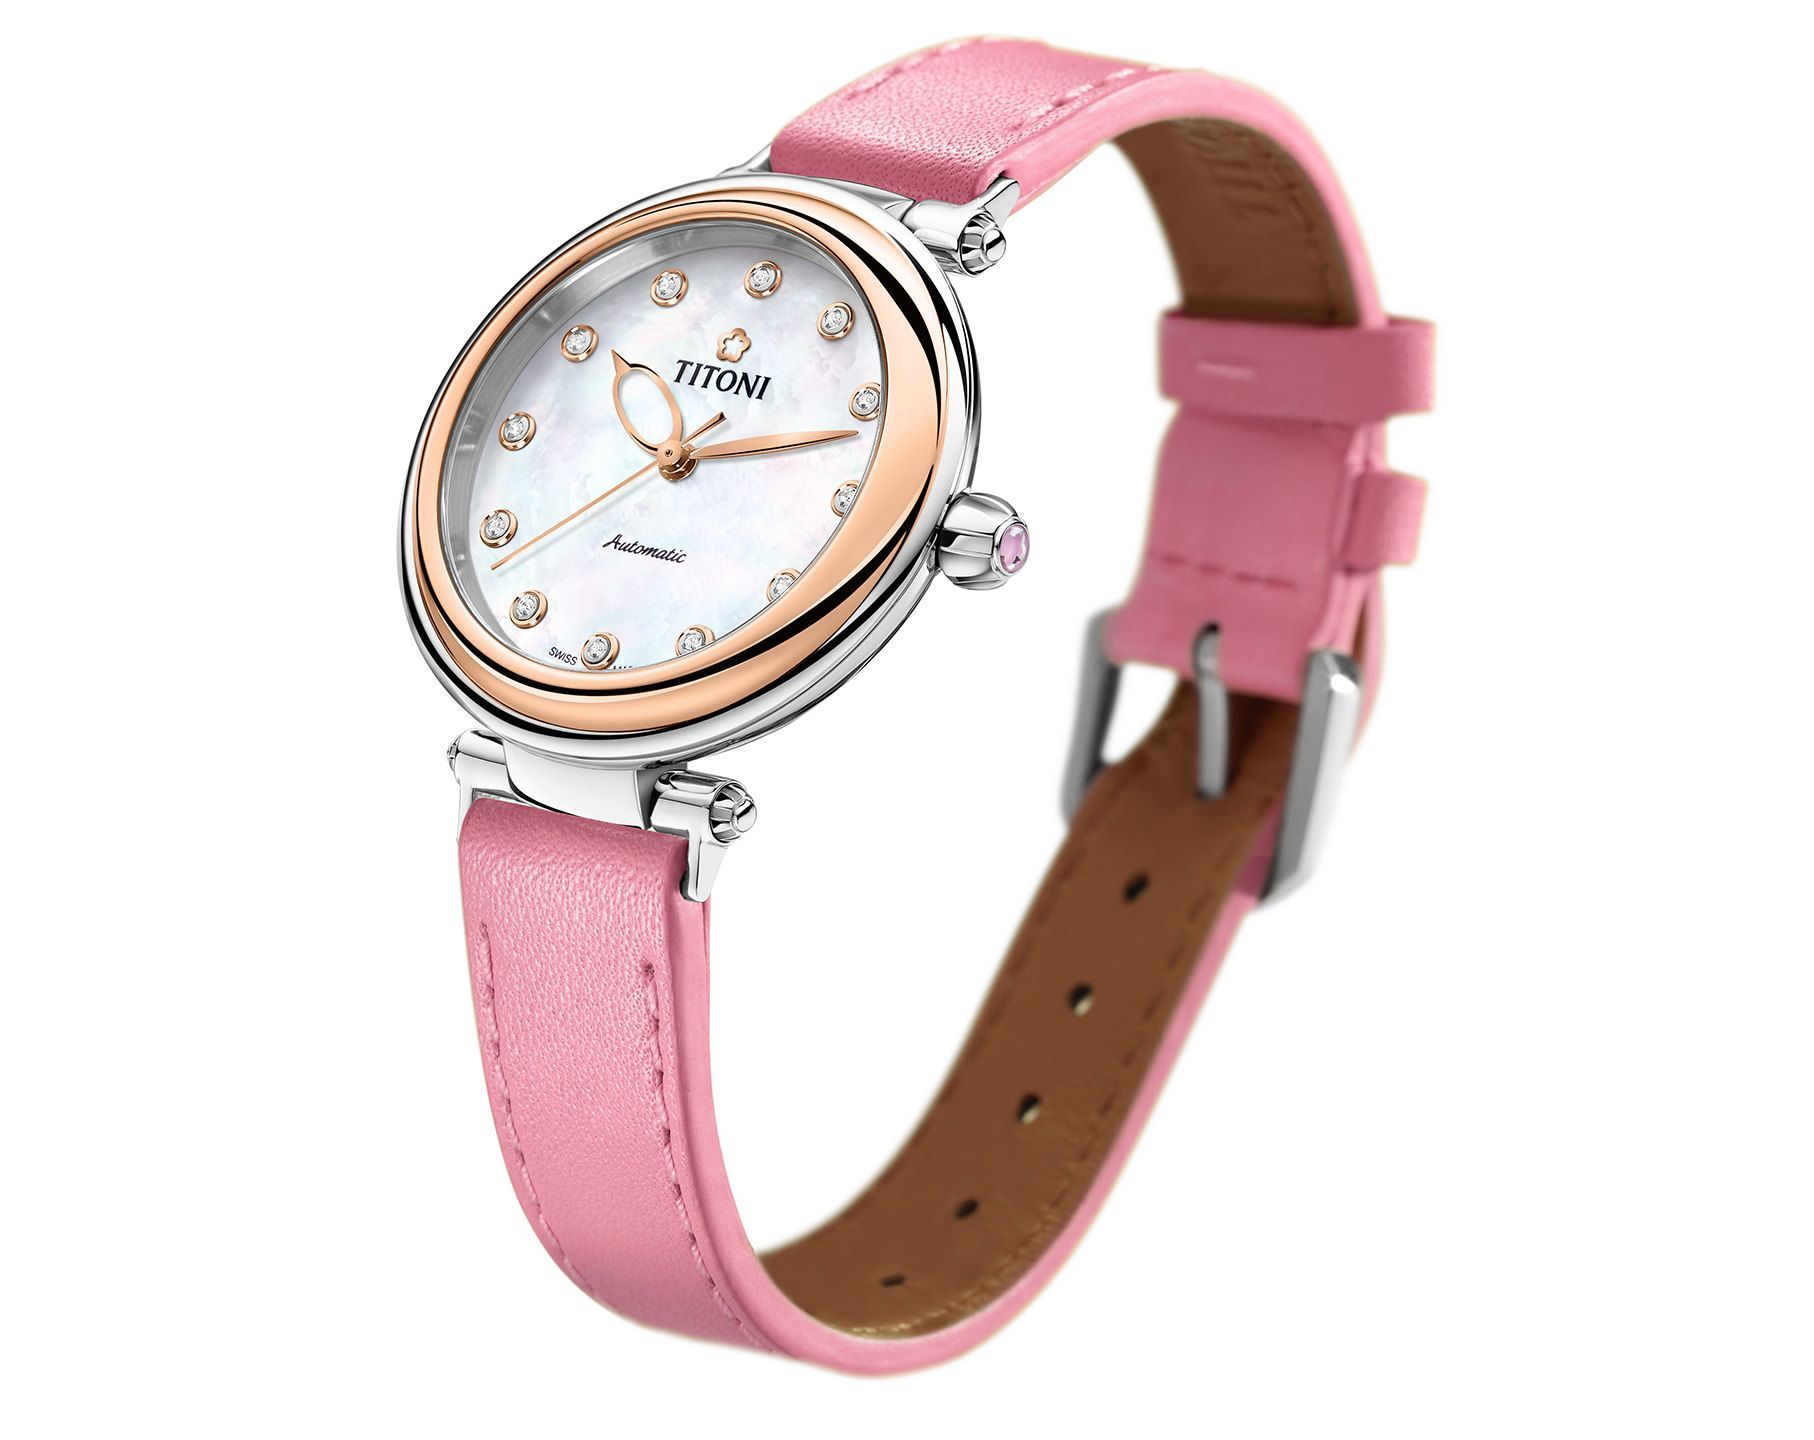 Titoni Miss Lovely  MOP Dial 33.5 mm Automatic Watch For Women - 3